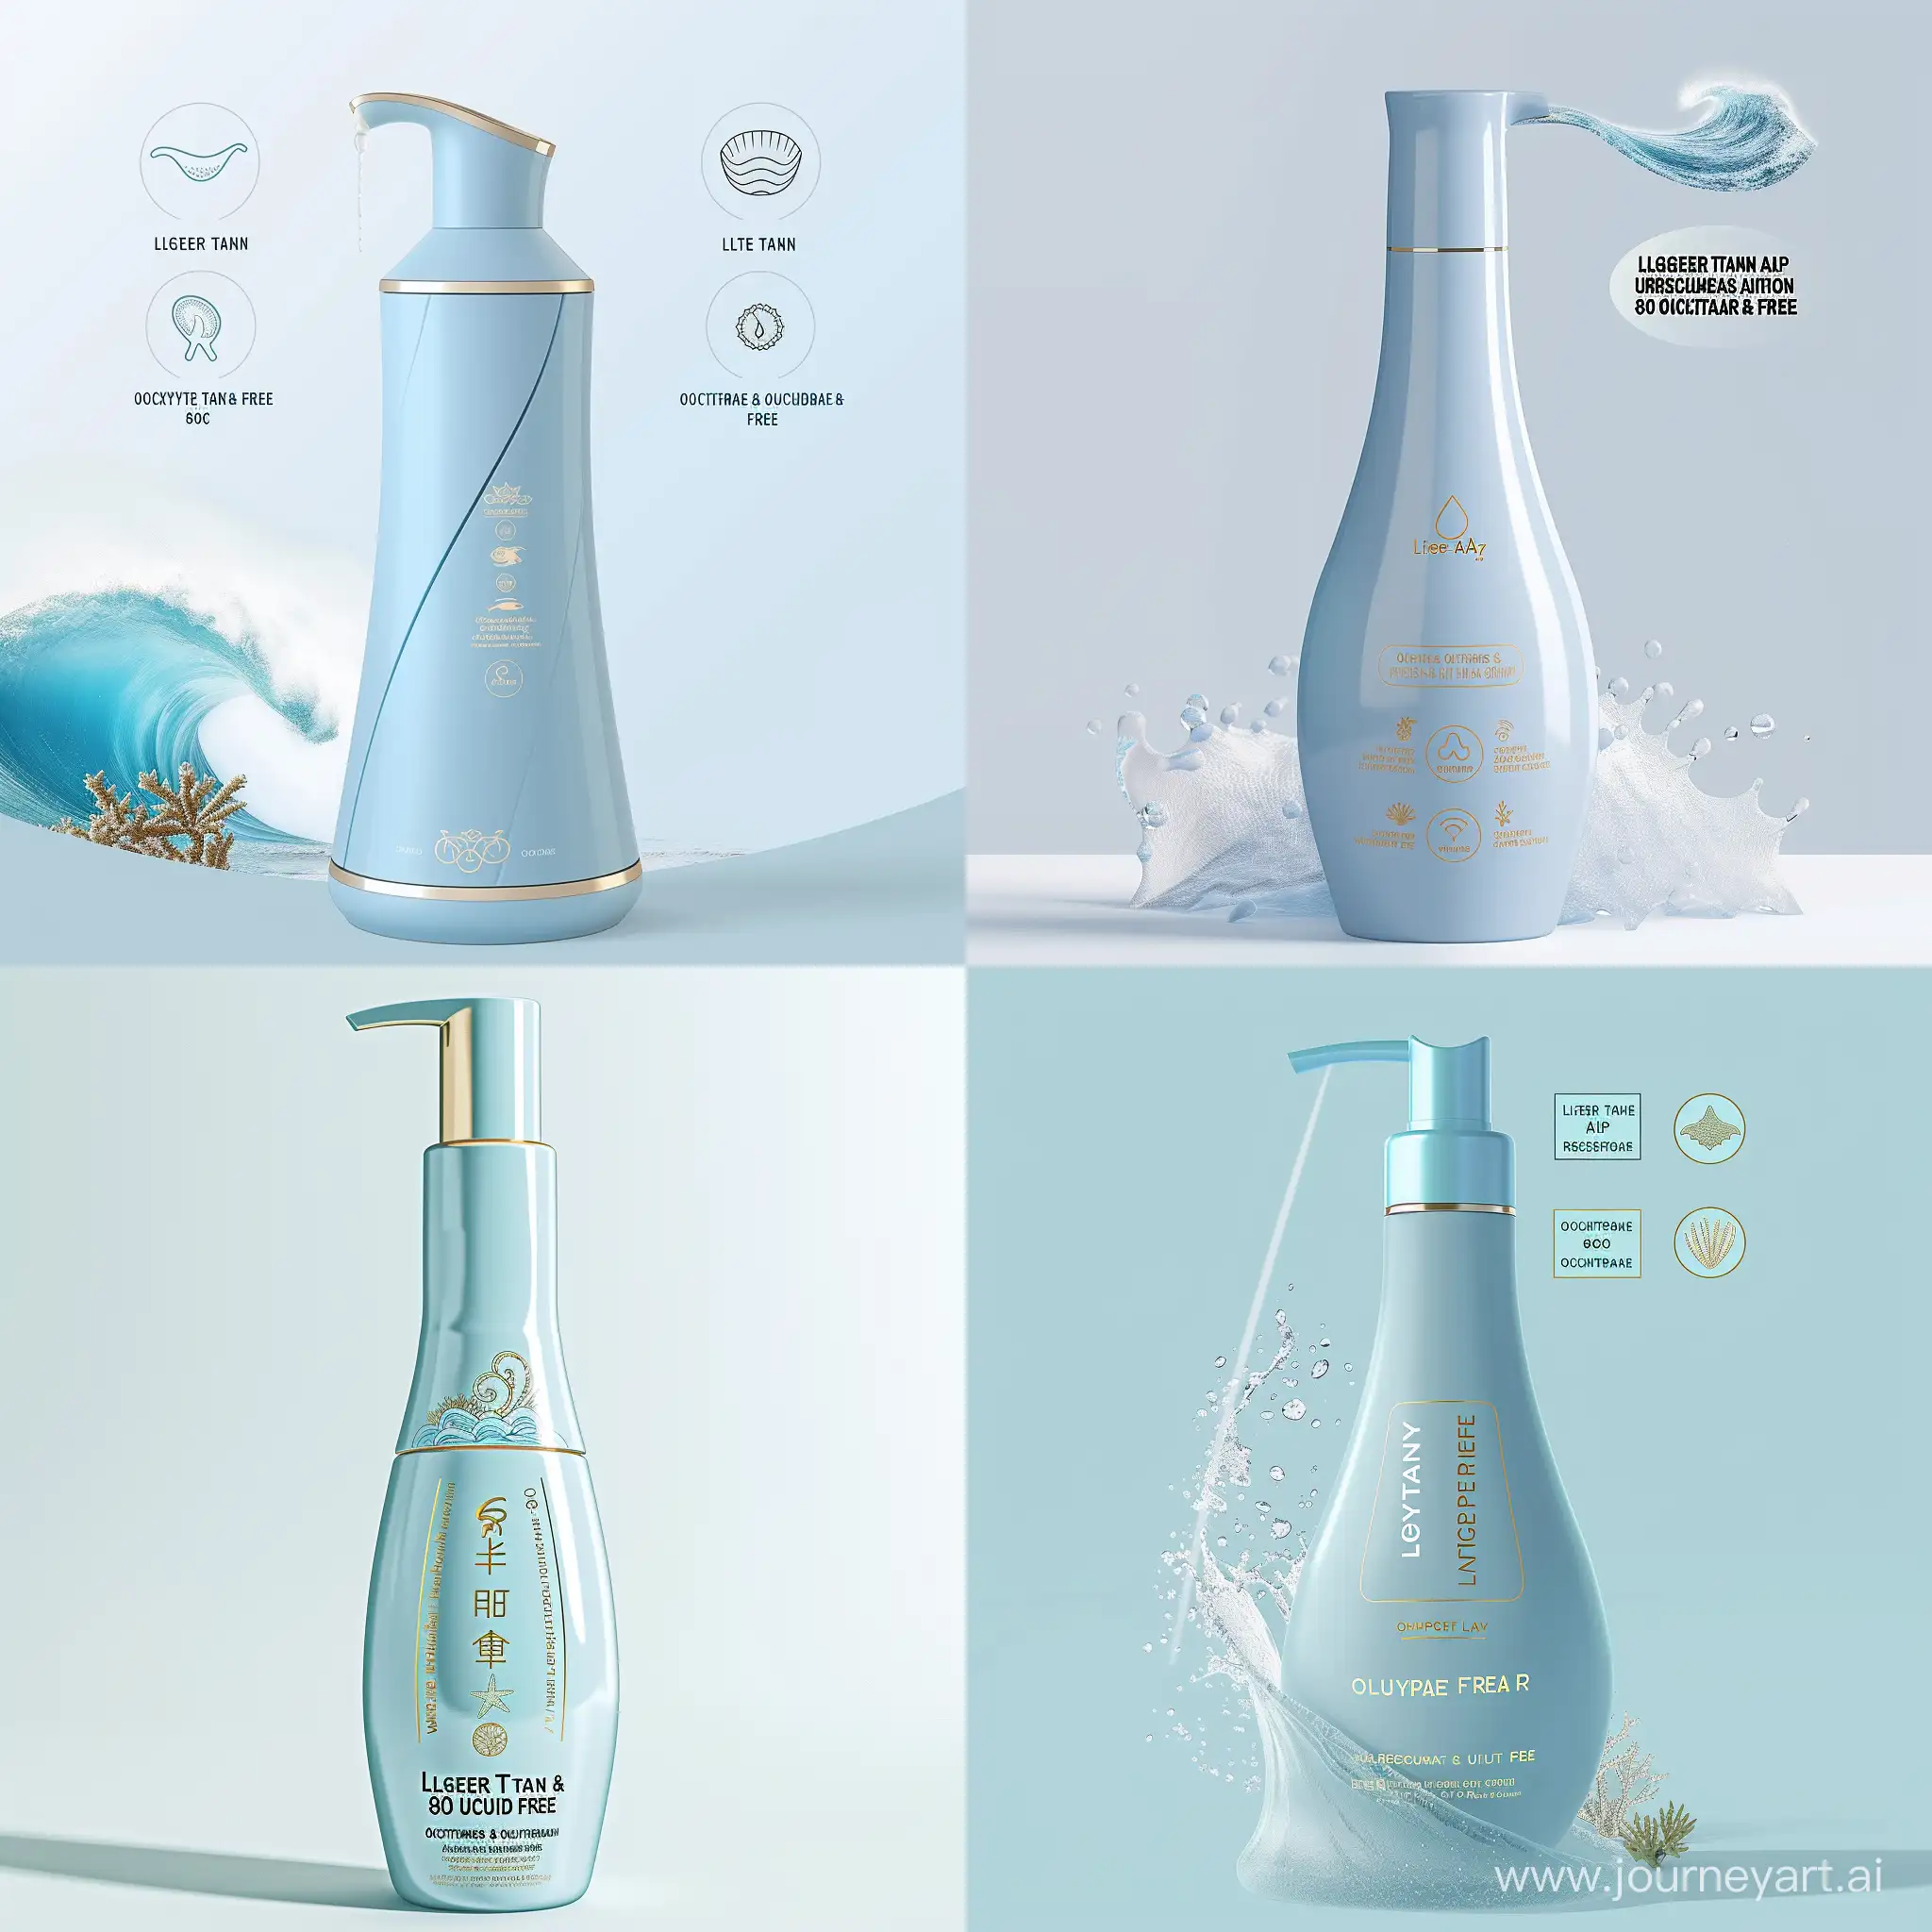 imagine a sleek, baby blue bottle. The bottle should have a dispenser and look luxorious and synoblize pleasure. The labels on the bottle  should be "Lighter-Than-Air" , "Water-Resistant (80 minutes)", "Oxybenzone & Octinoxate free." They should be wrtitten in gold color. Additionally, include symbols representing the product being eco-friendly, cruelty-free, and vegan attributes. Also add a small image of a wave and a coral reef